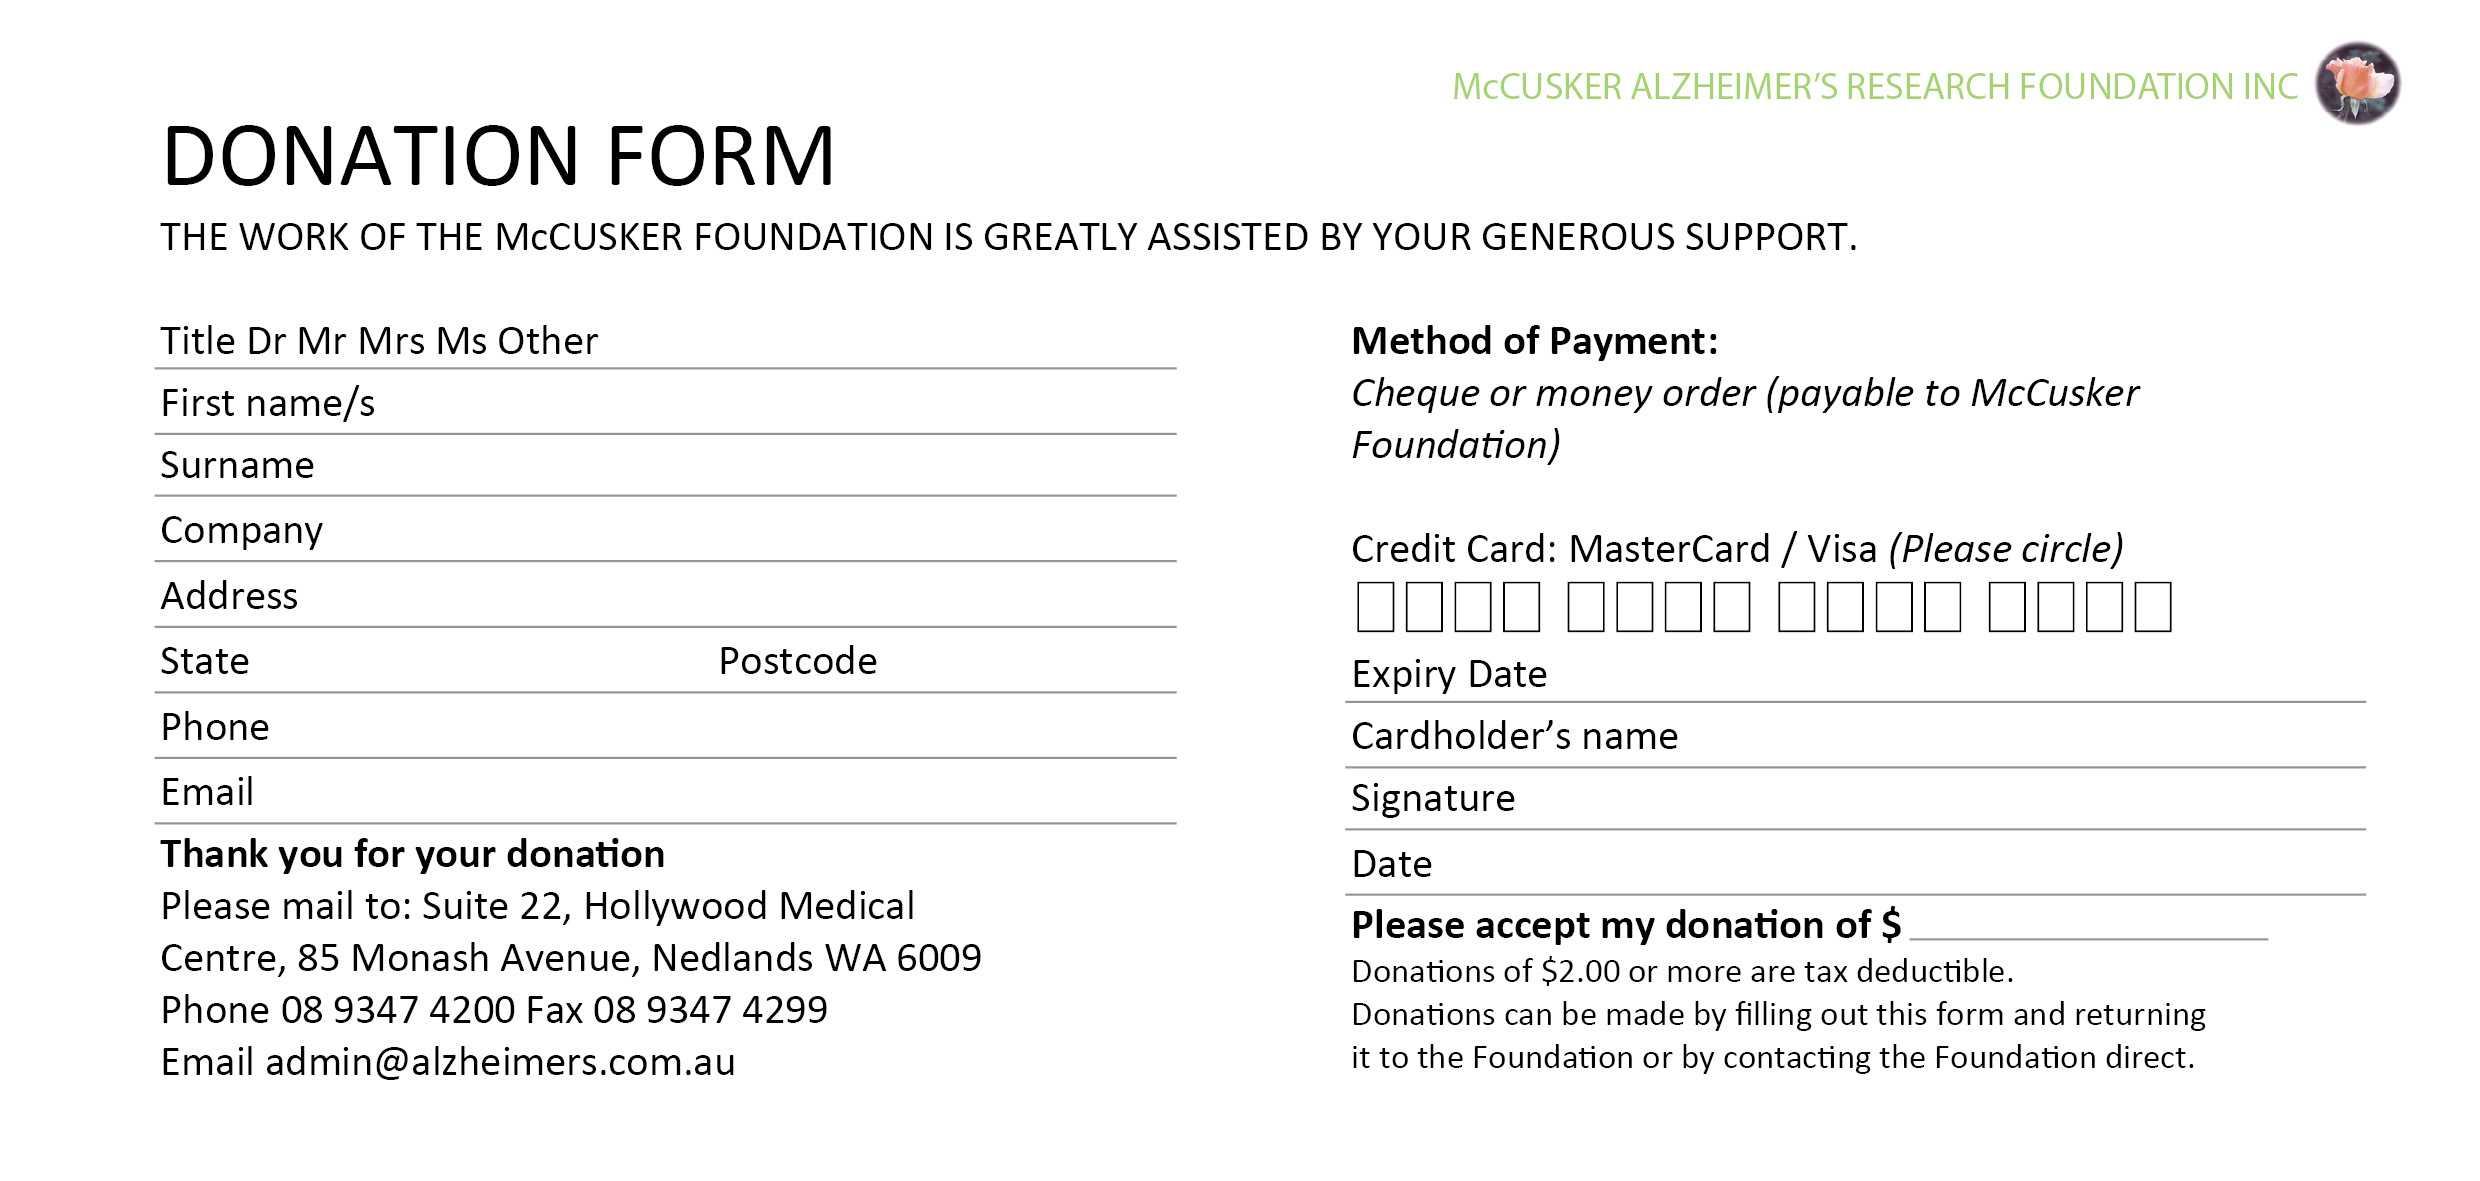 037 Fundraising Request Form Template Card Donation 458179 With Donation Card Template Free